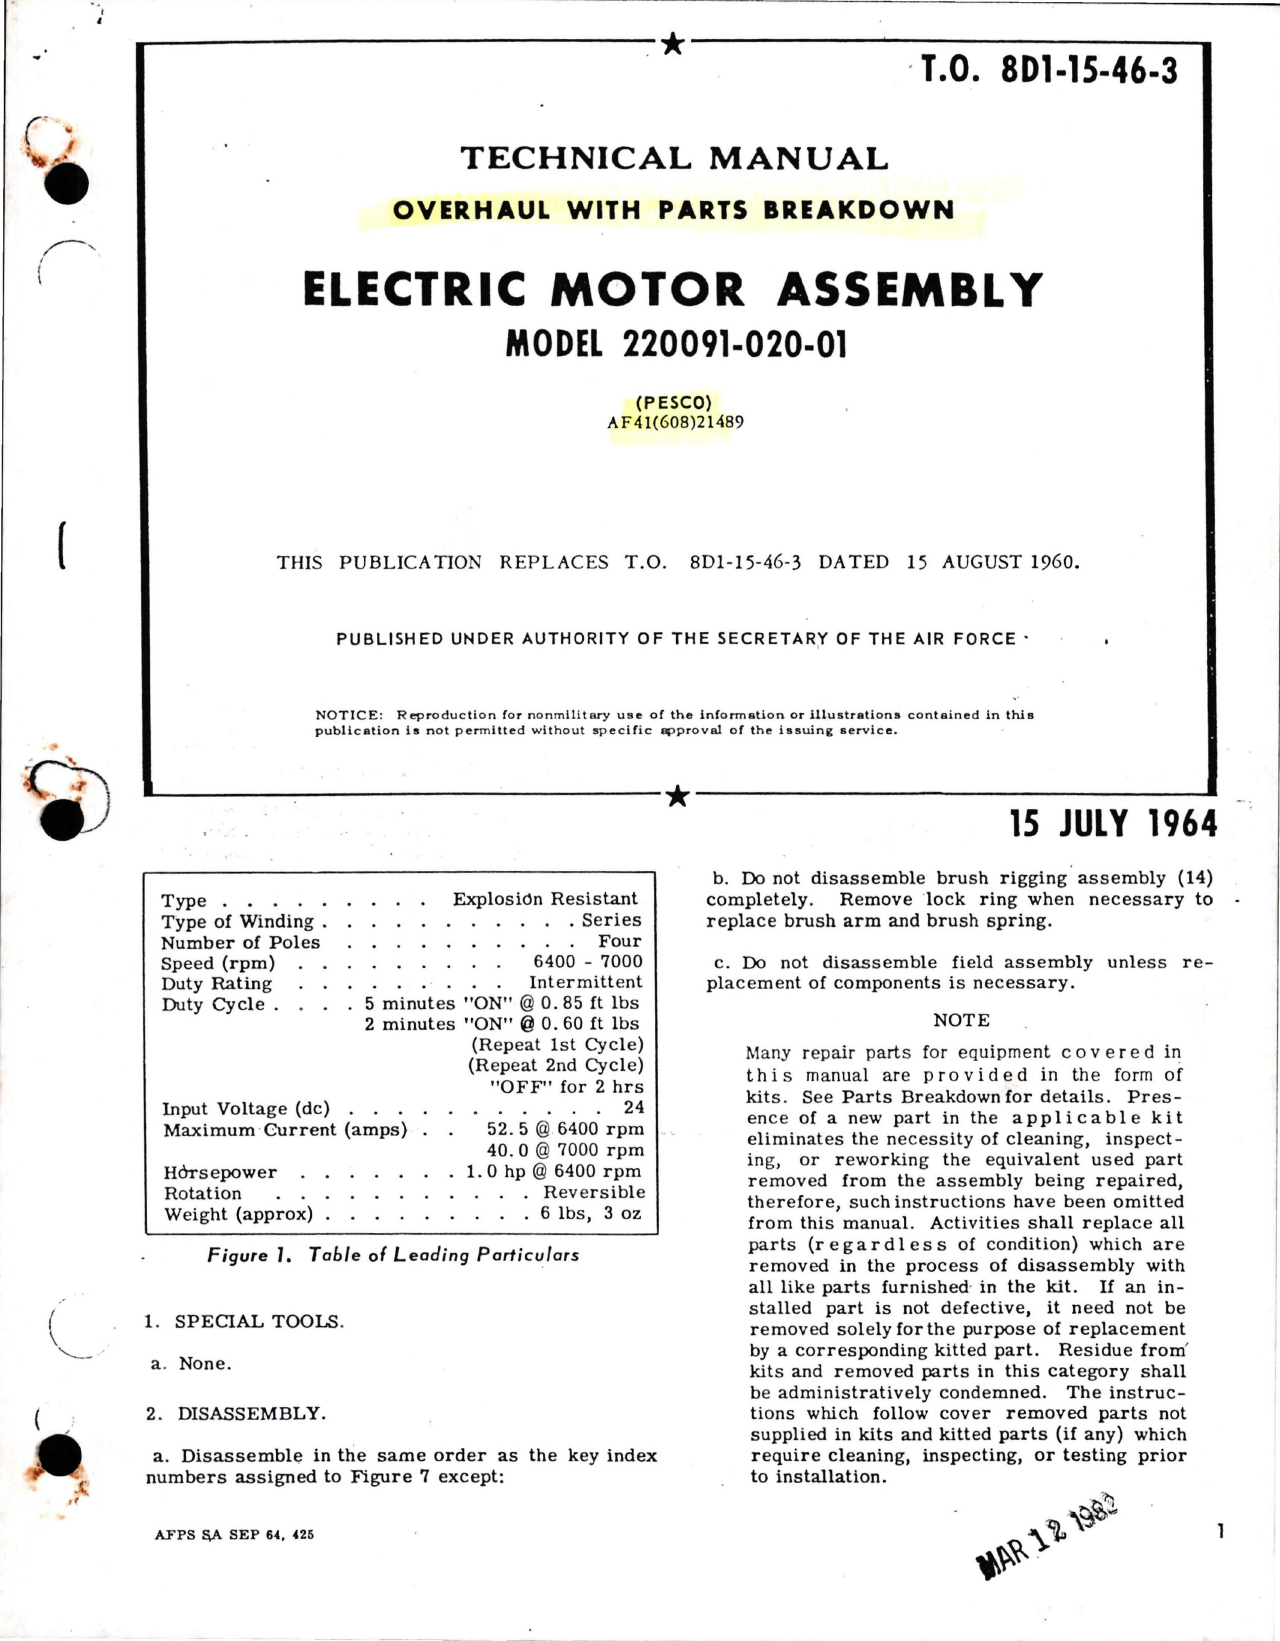 Sample page 1 from AirCorps Library document: Overhaul with Parts Breakdown for Electric Motor Assembly - Model 220091-020-01